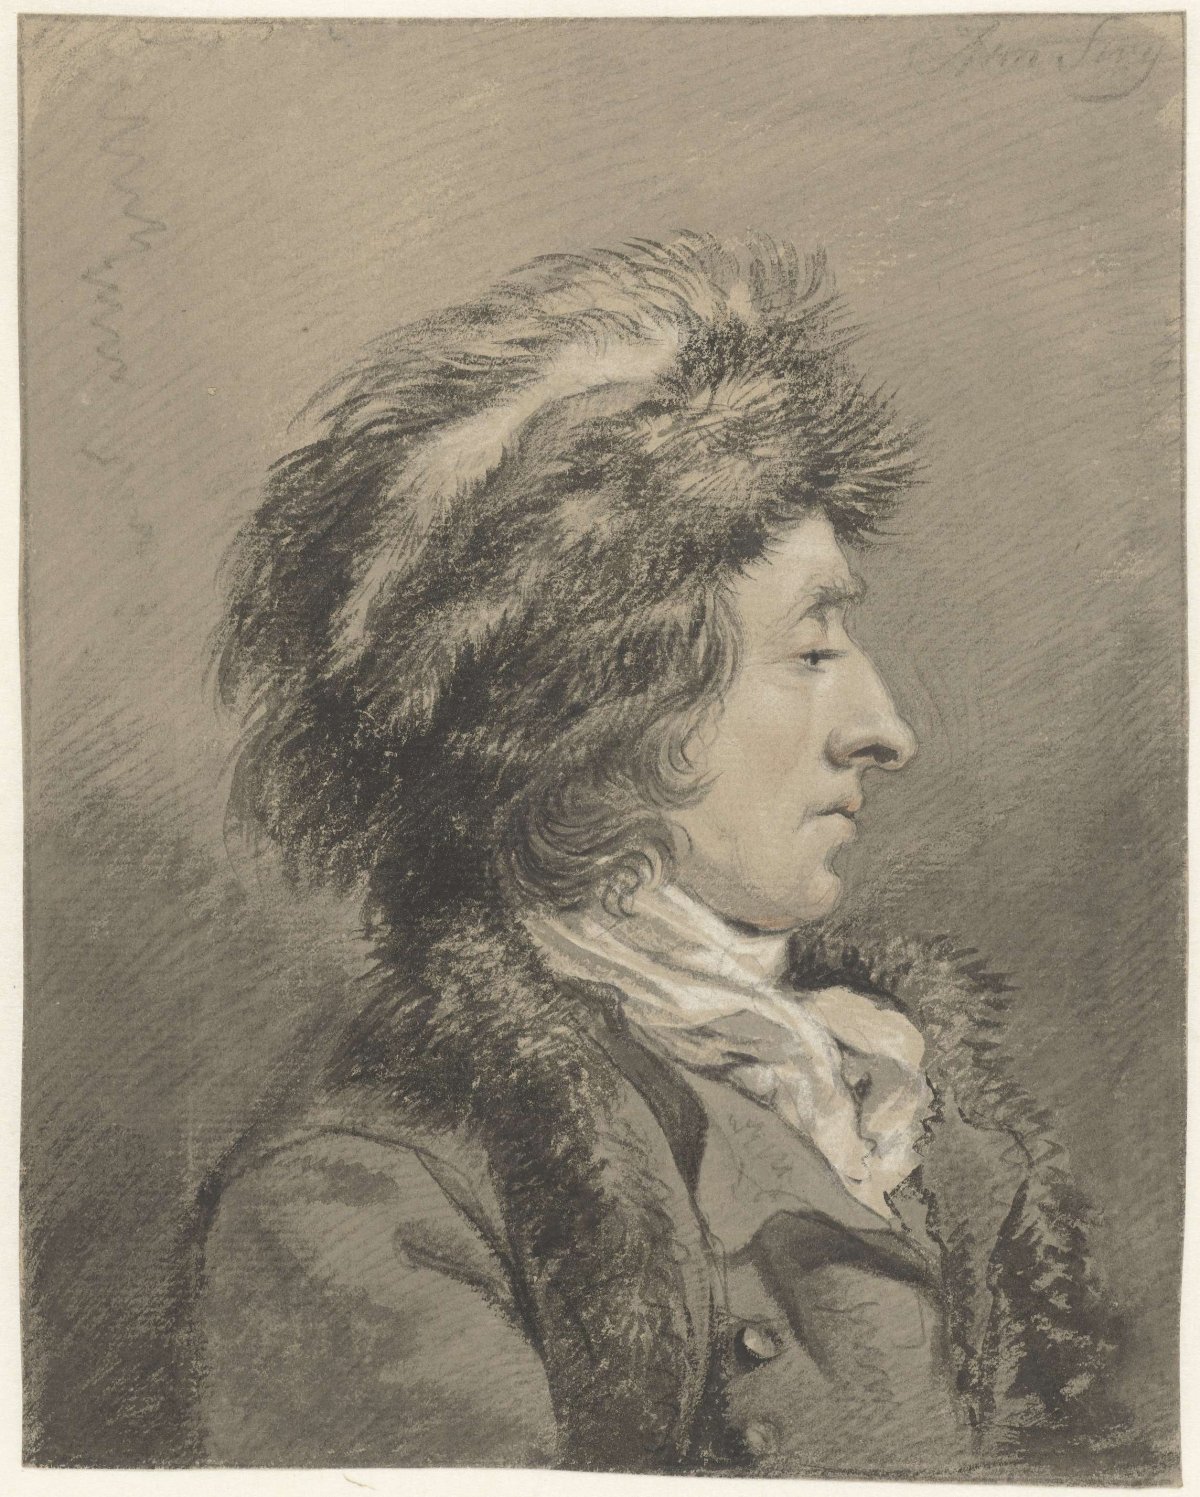 Man with fur hat, profile to the right, Abraham van Strij (I), 1763 - 1826